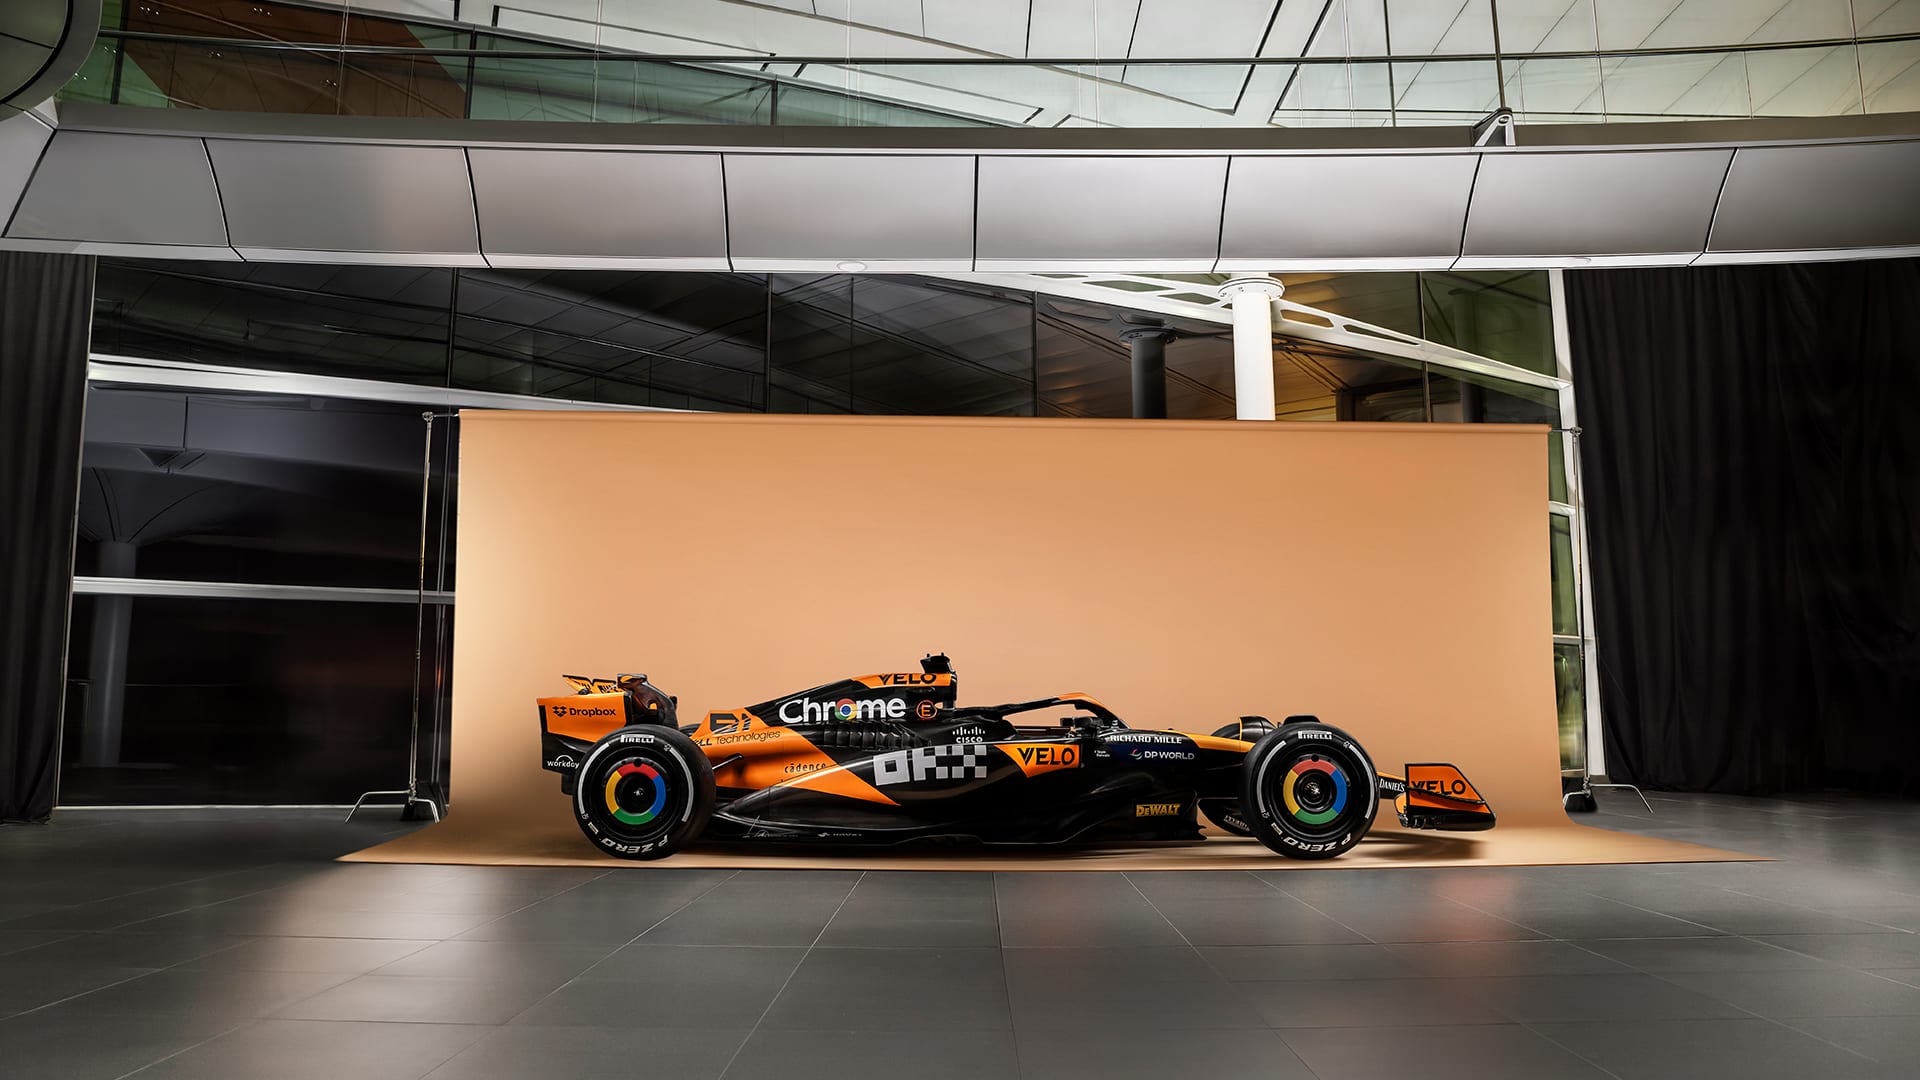 FIRST LOOK: McLaren present new F1 car ahead of Silverstone